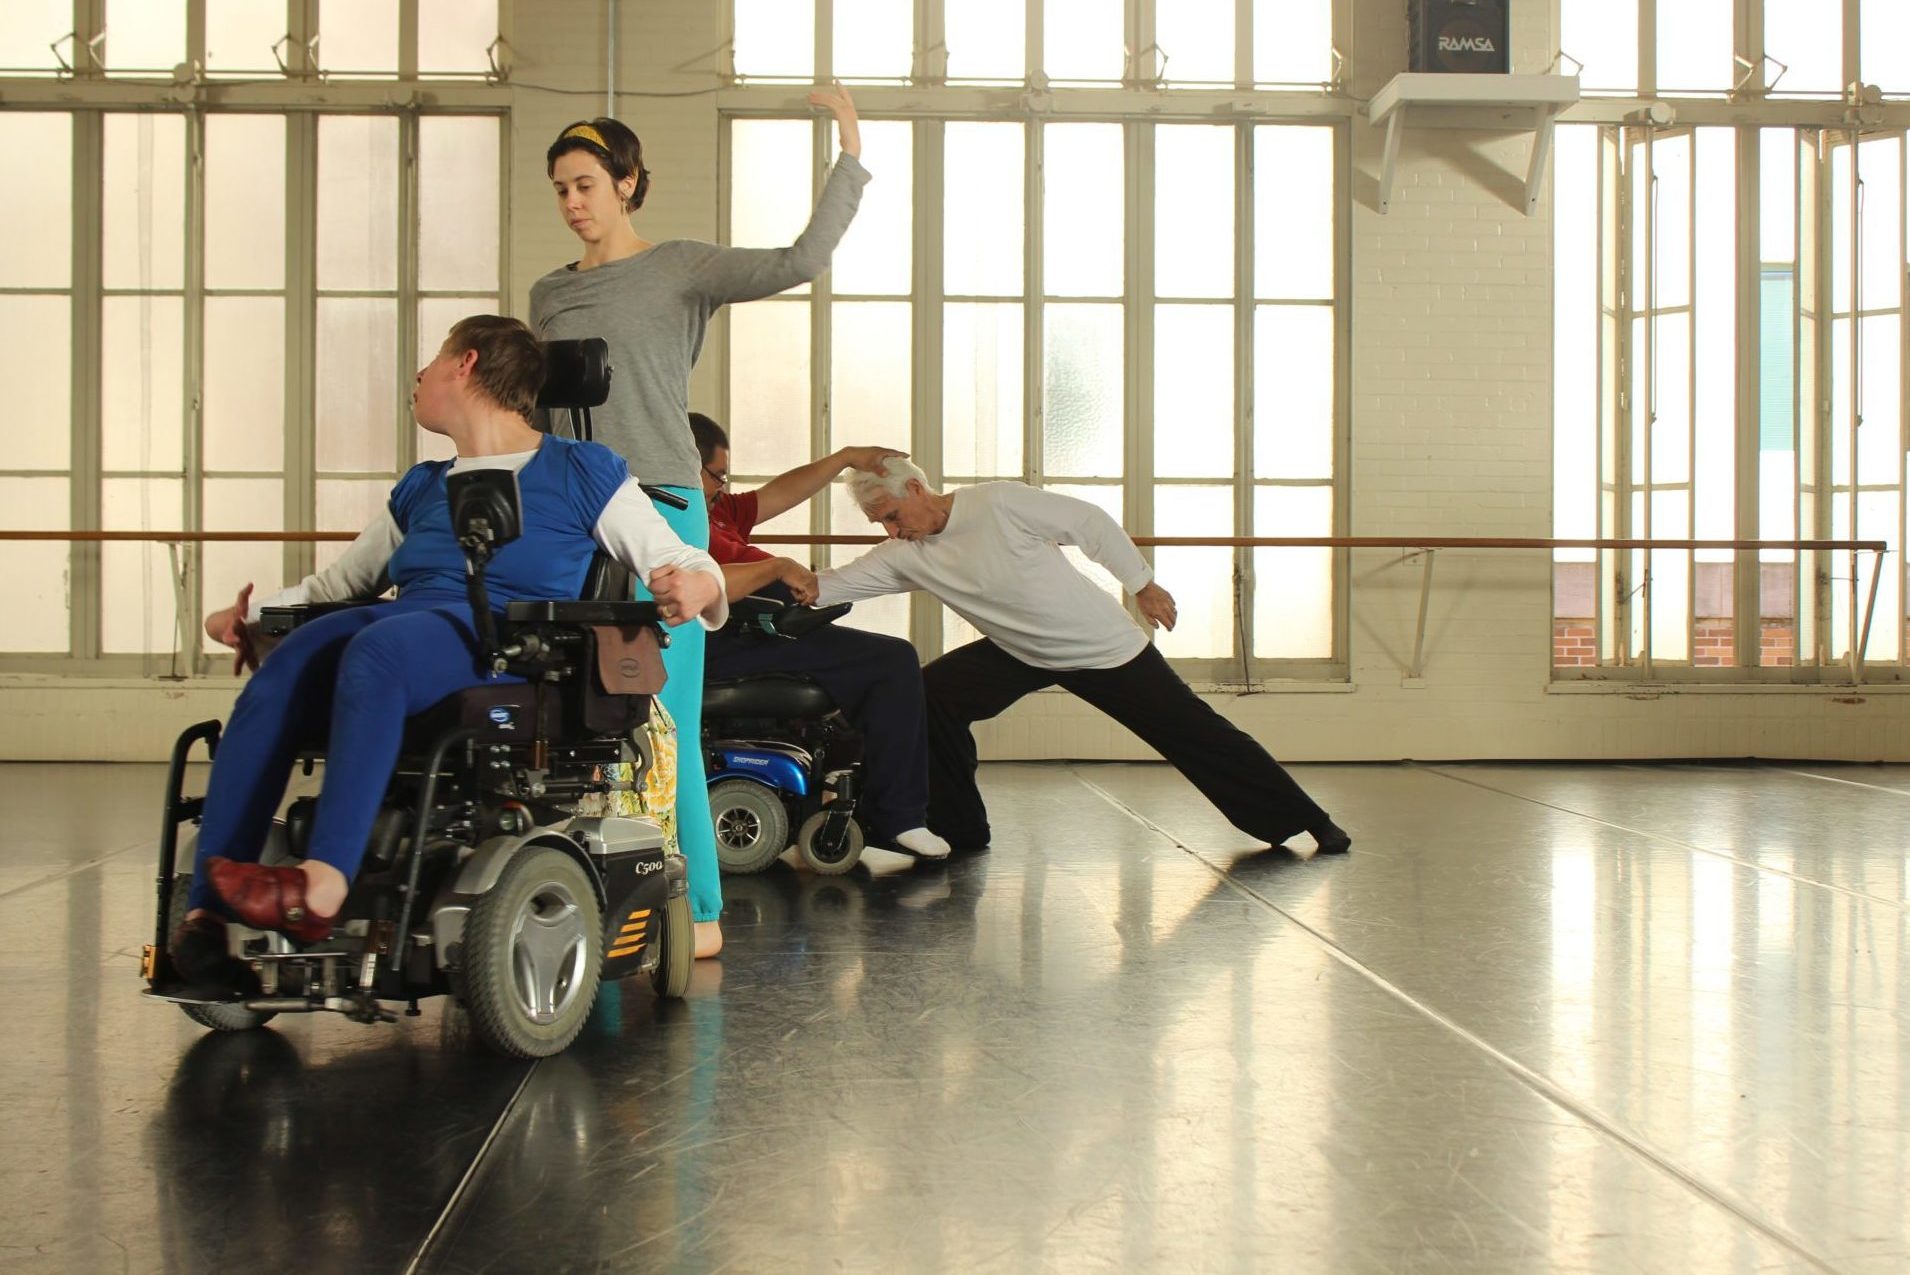 4 dancers with and without disabilities practice in a brightly lit dance studio with tall windows.